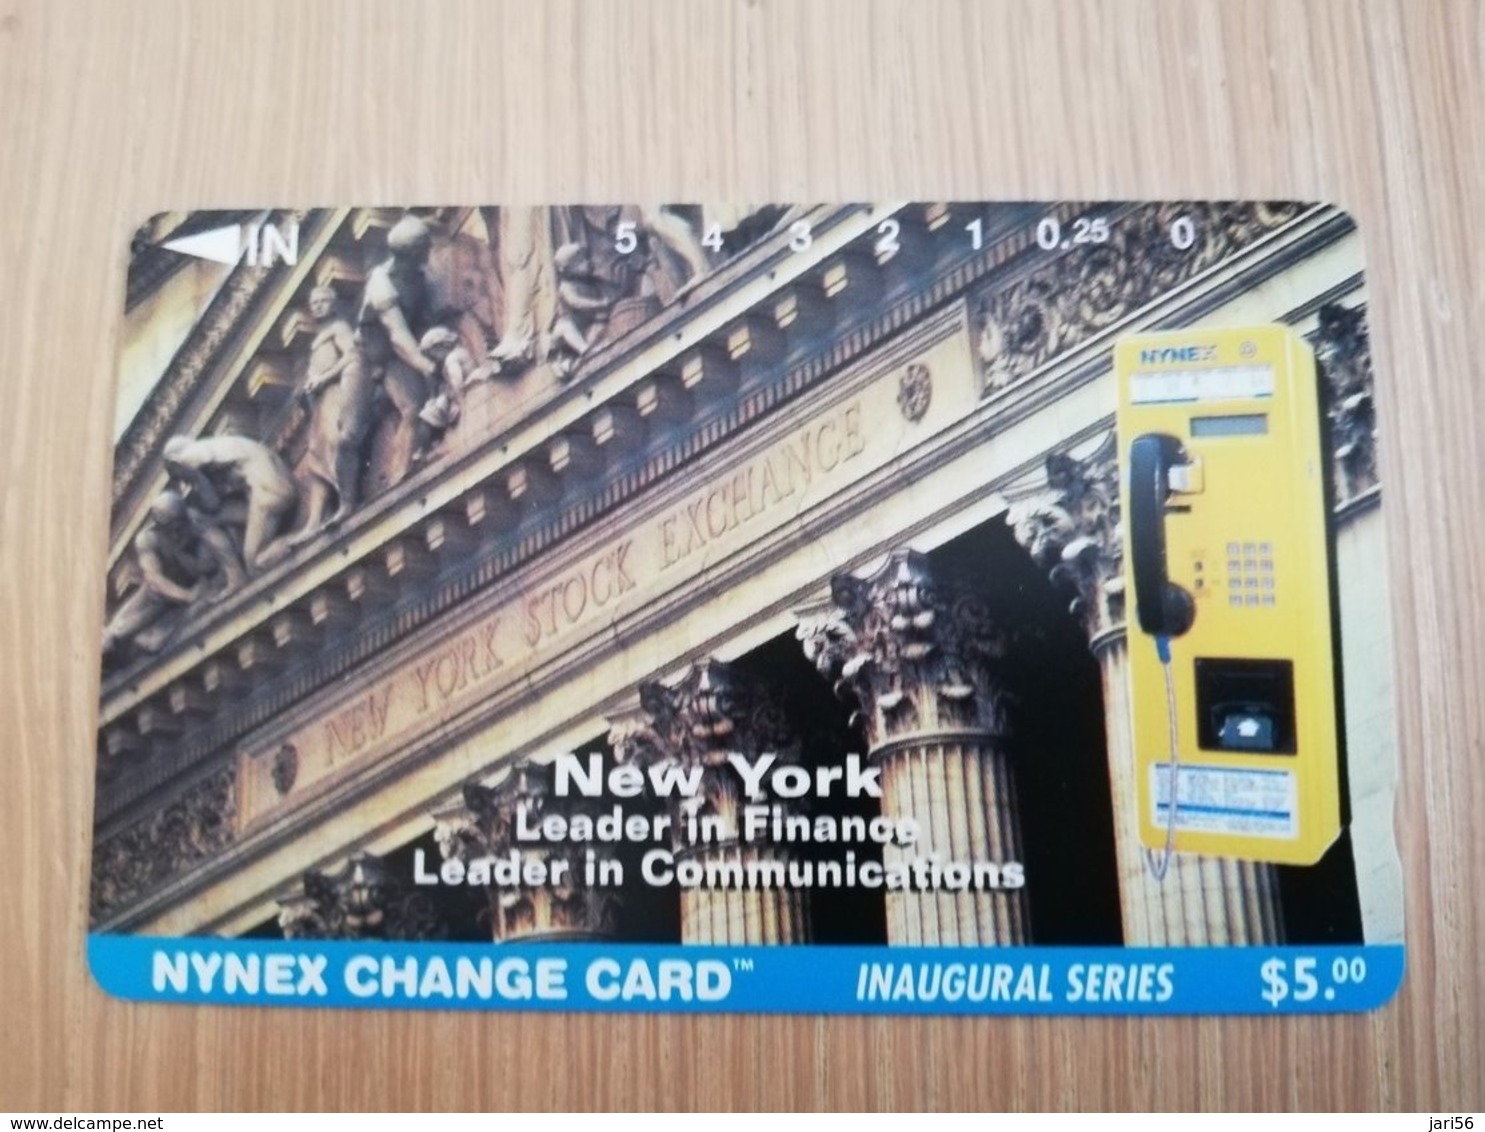 UNITED STATES  NYNEX  NEW YORKS FIRST PHONE CARD INAUGURAL SERIES  4 CARDS   MINT   LIMITED EDITION ** 1396**